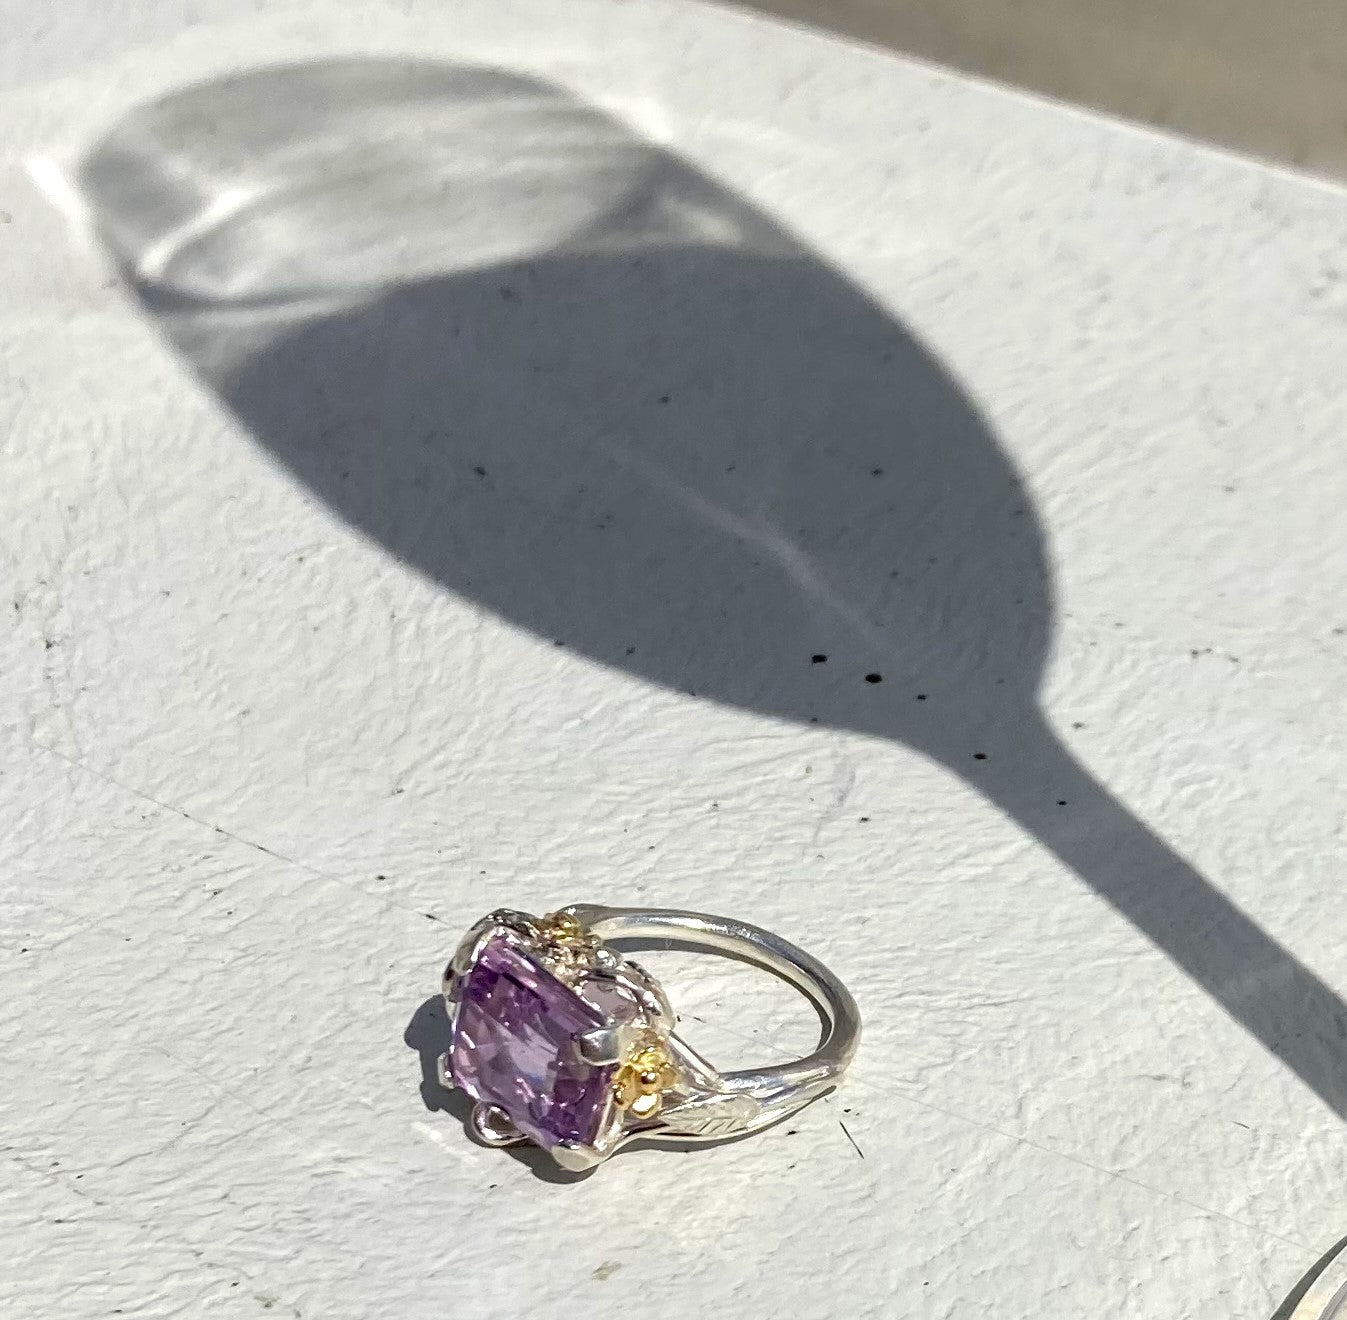 shadow of wine glass and fancy amethyst cocktail ring